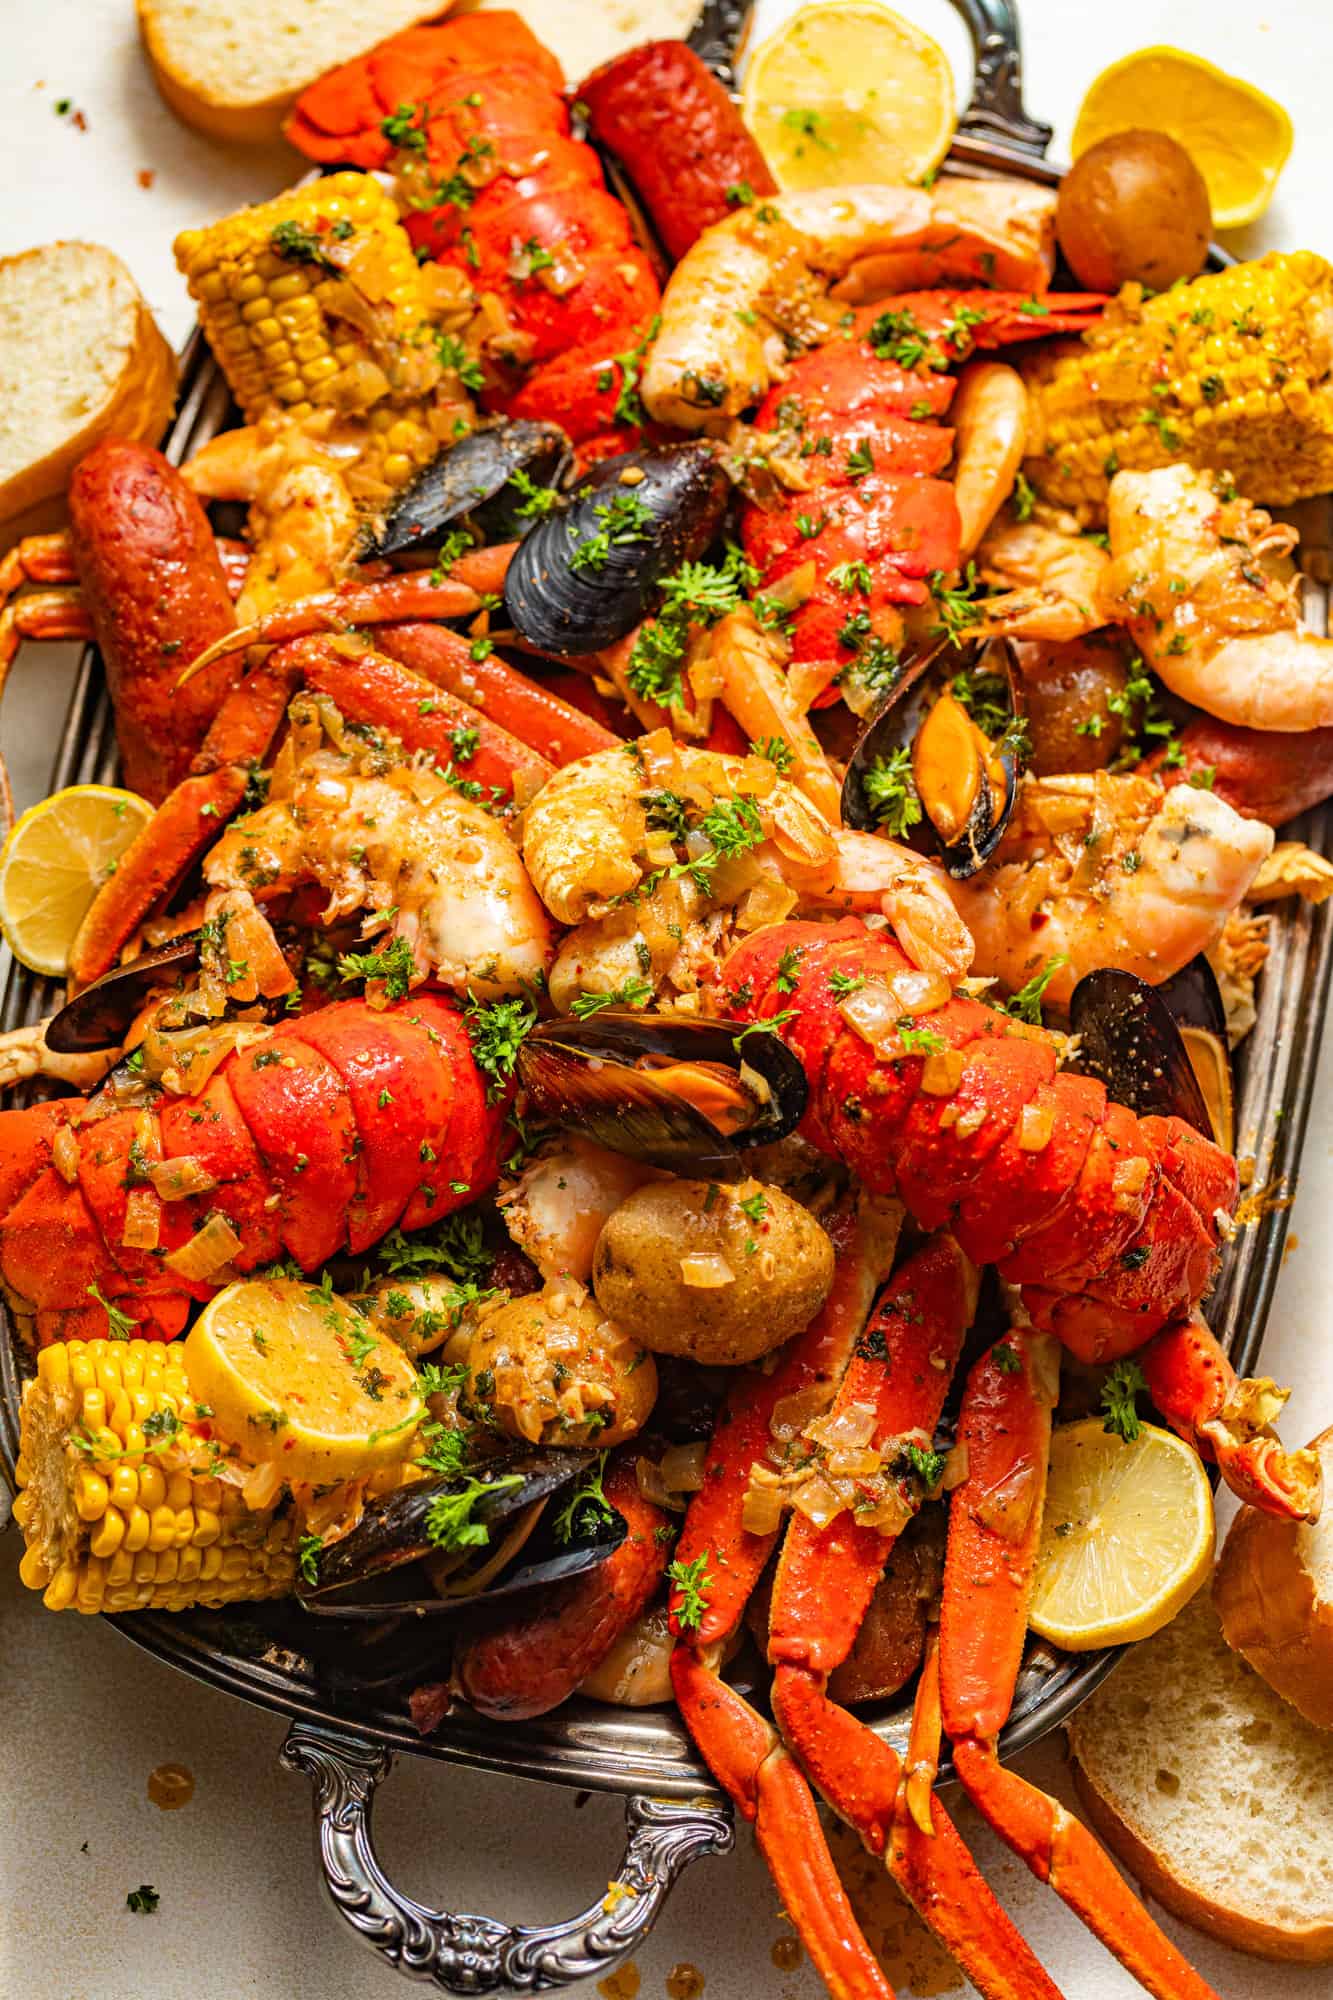 crabs legs, lobster, corn, sausage, potatoes, clams, mussels, and shrimp all on a silver serving tray covered in seafood boil sauce and fresh parsley